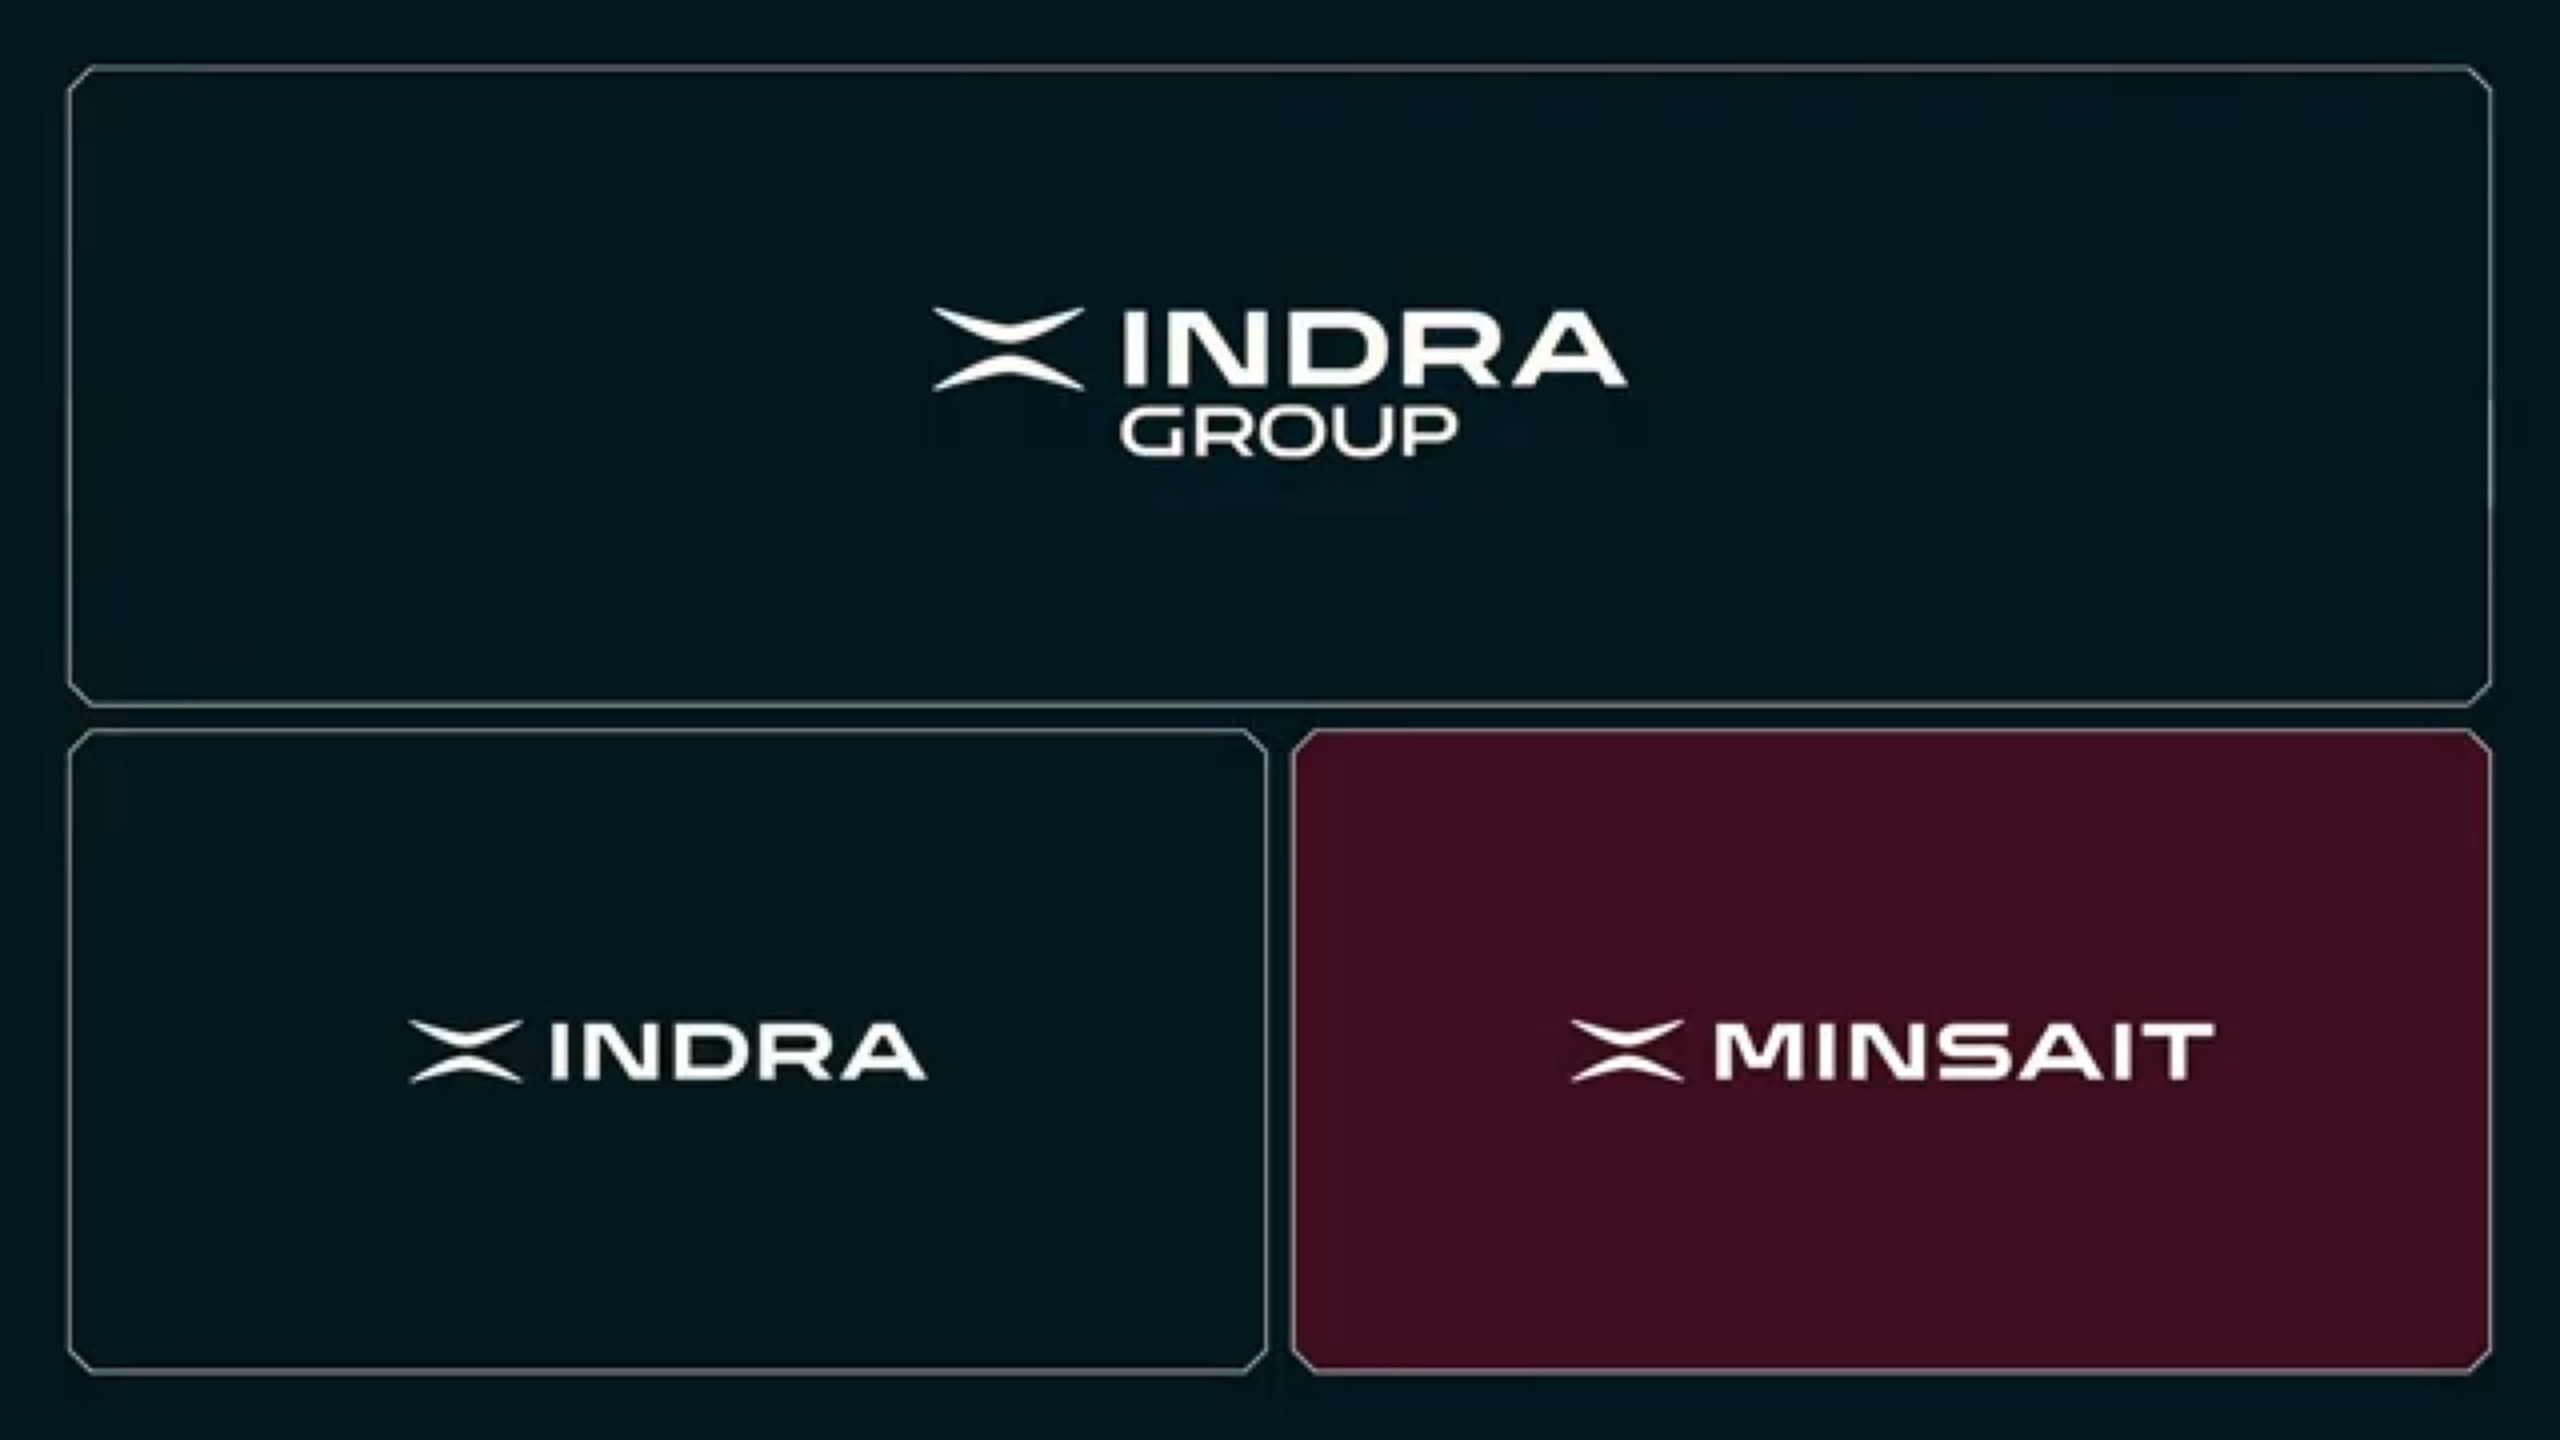 Indra Group